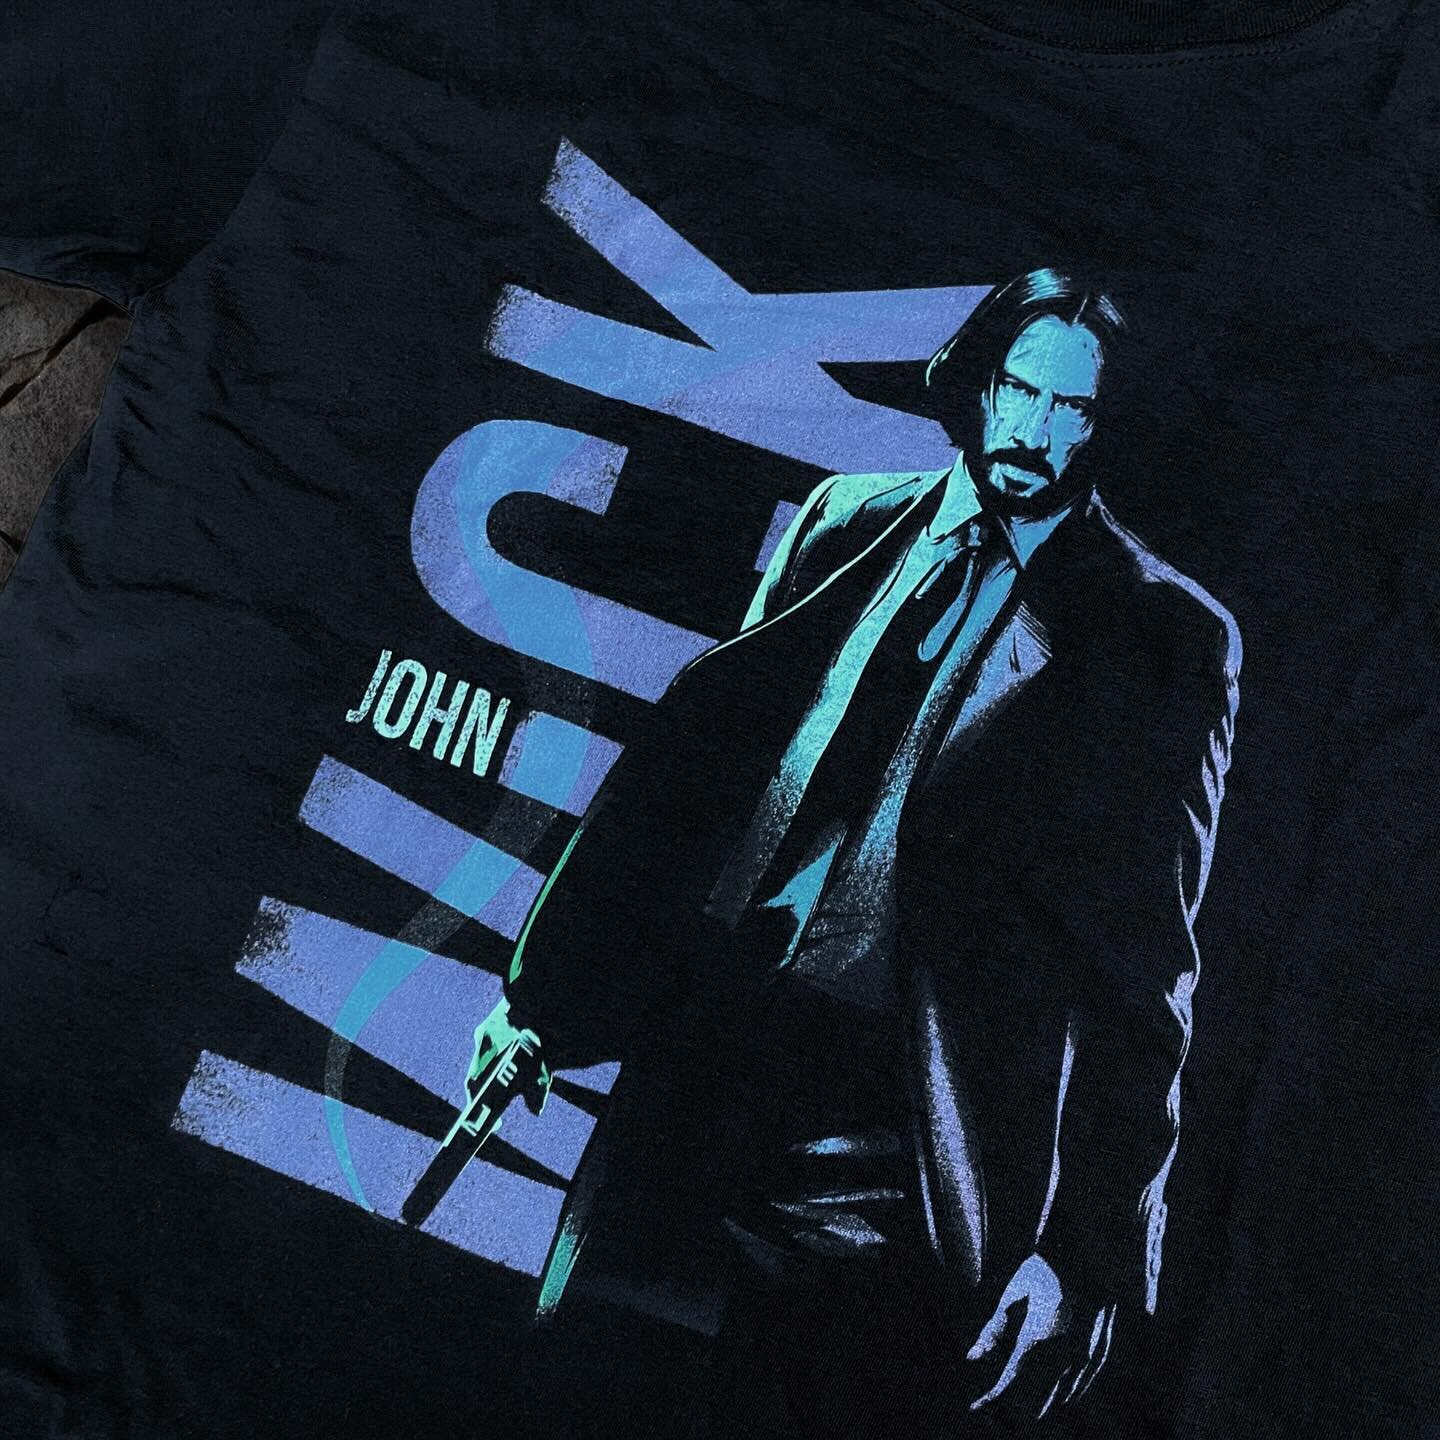 How you do anything is how you do everything.

New John Wick t-shirts available in-store now and online soon!

#tvm #tvandmoviestore #tvmnorwich #televisionandmoviestore #thetvandmoviestore #norwich #johnwick #johnwick4 #keanureeves #thecontinental #